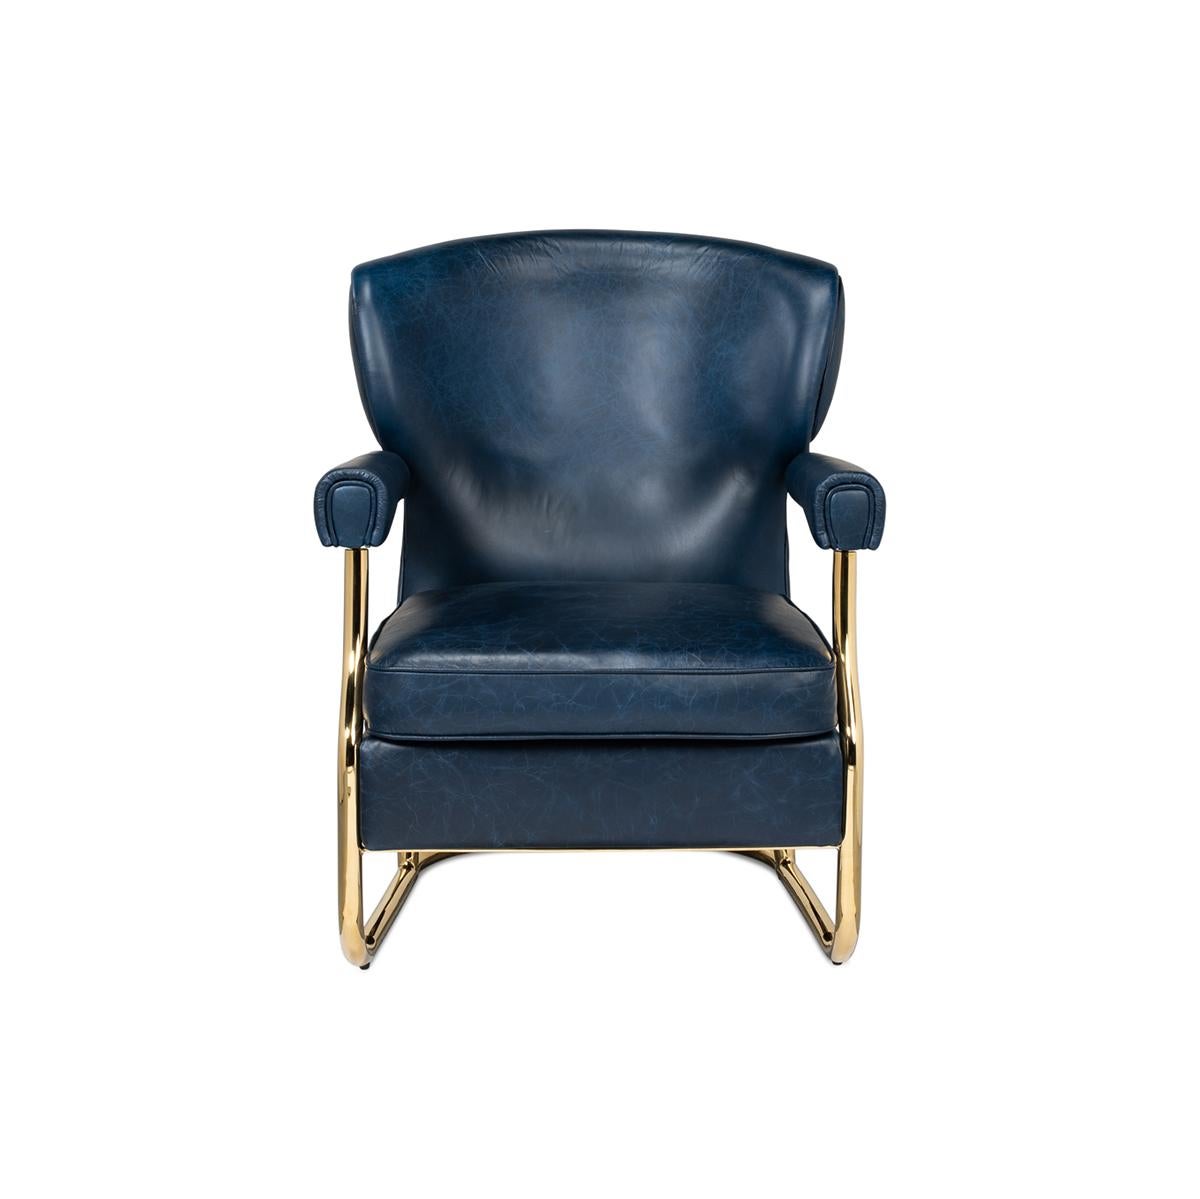 With a curved backrest and cushion seat upholstered in Vintage Style Chateau Blue. With a metal tube industrial-style frame finished in a soft brass tone.

Dimensions: 28